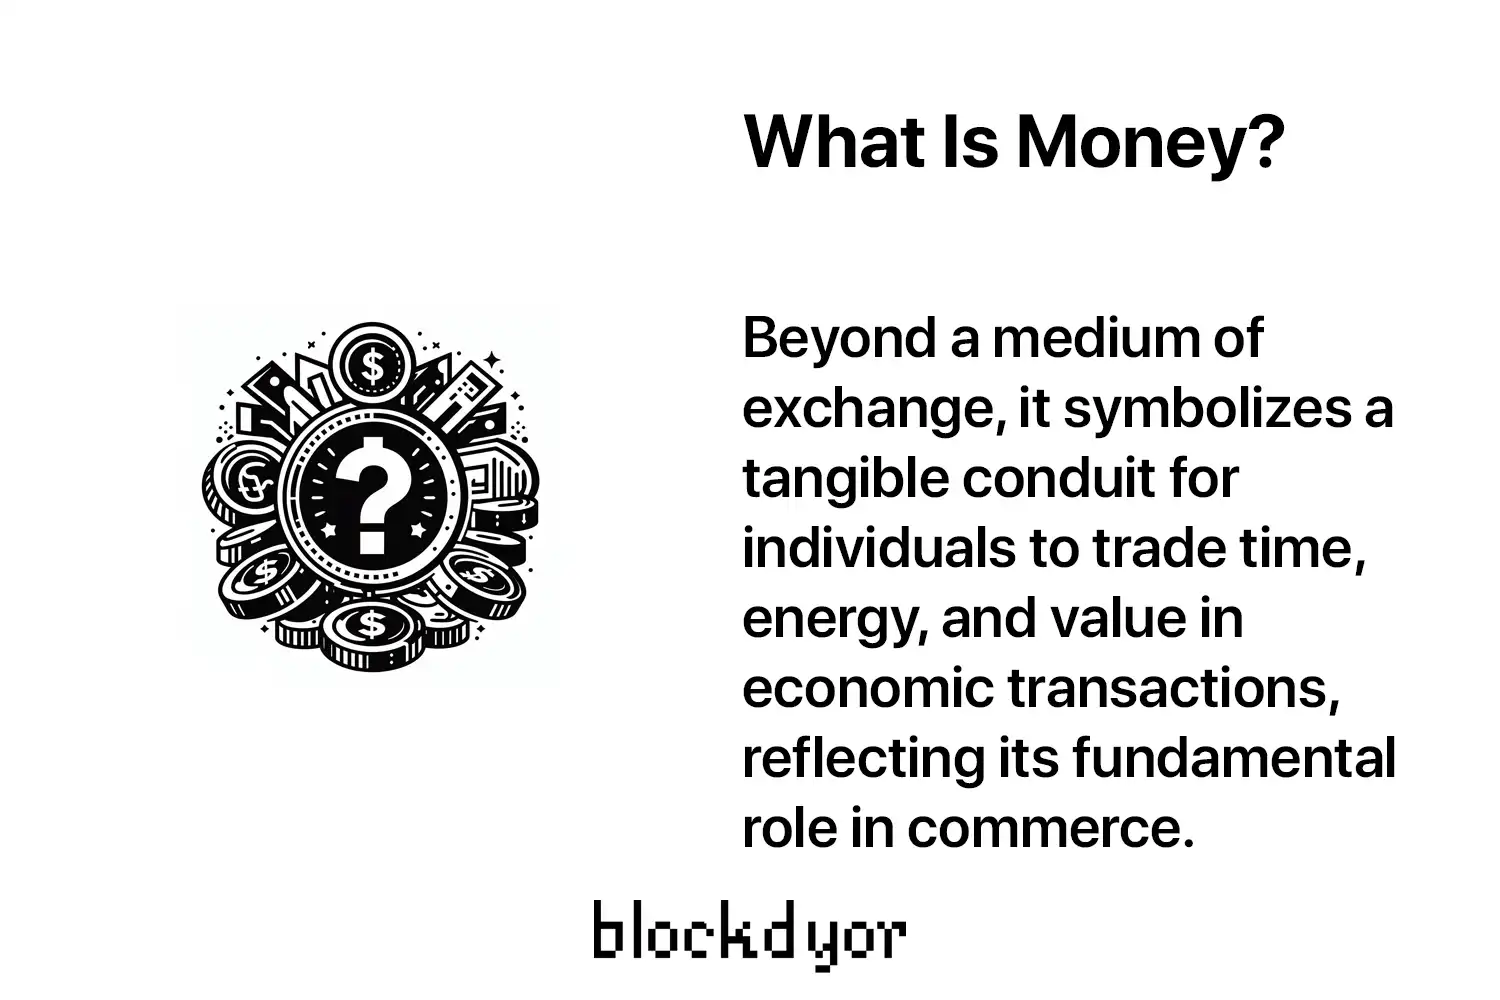 What Is Money Overview